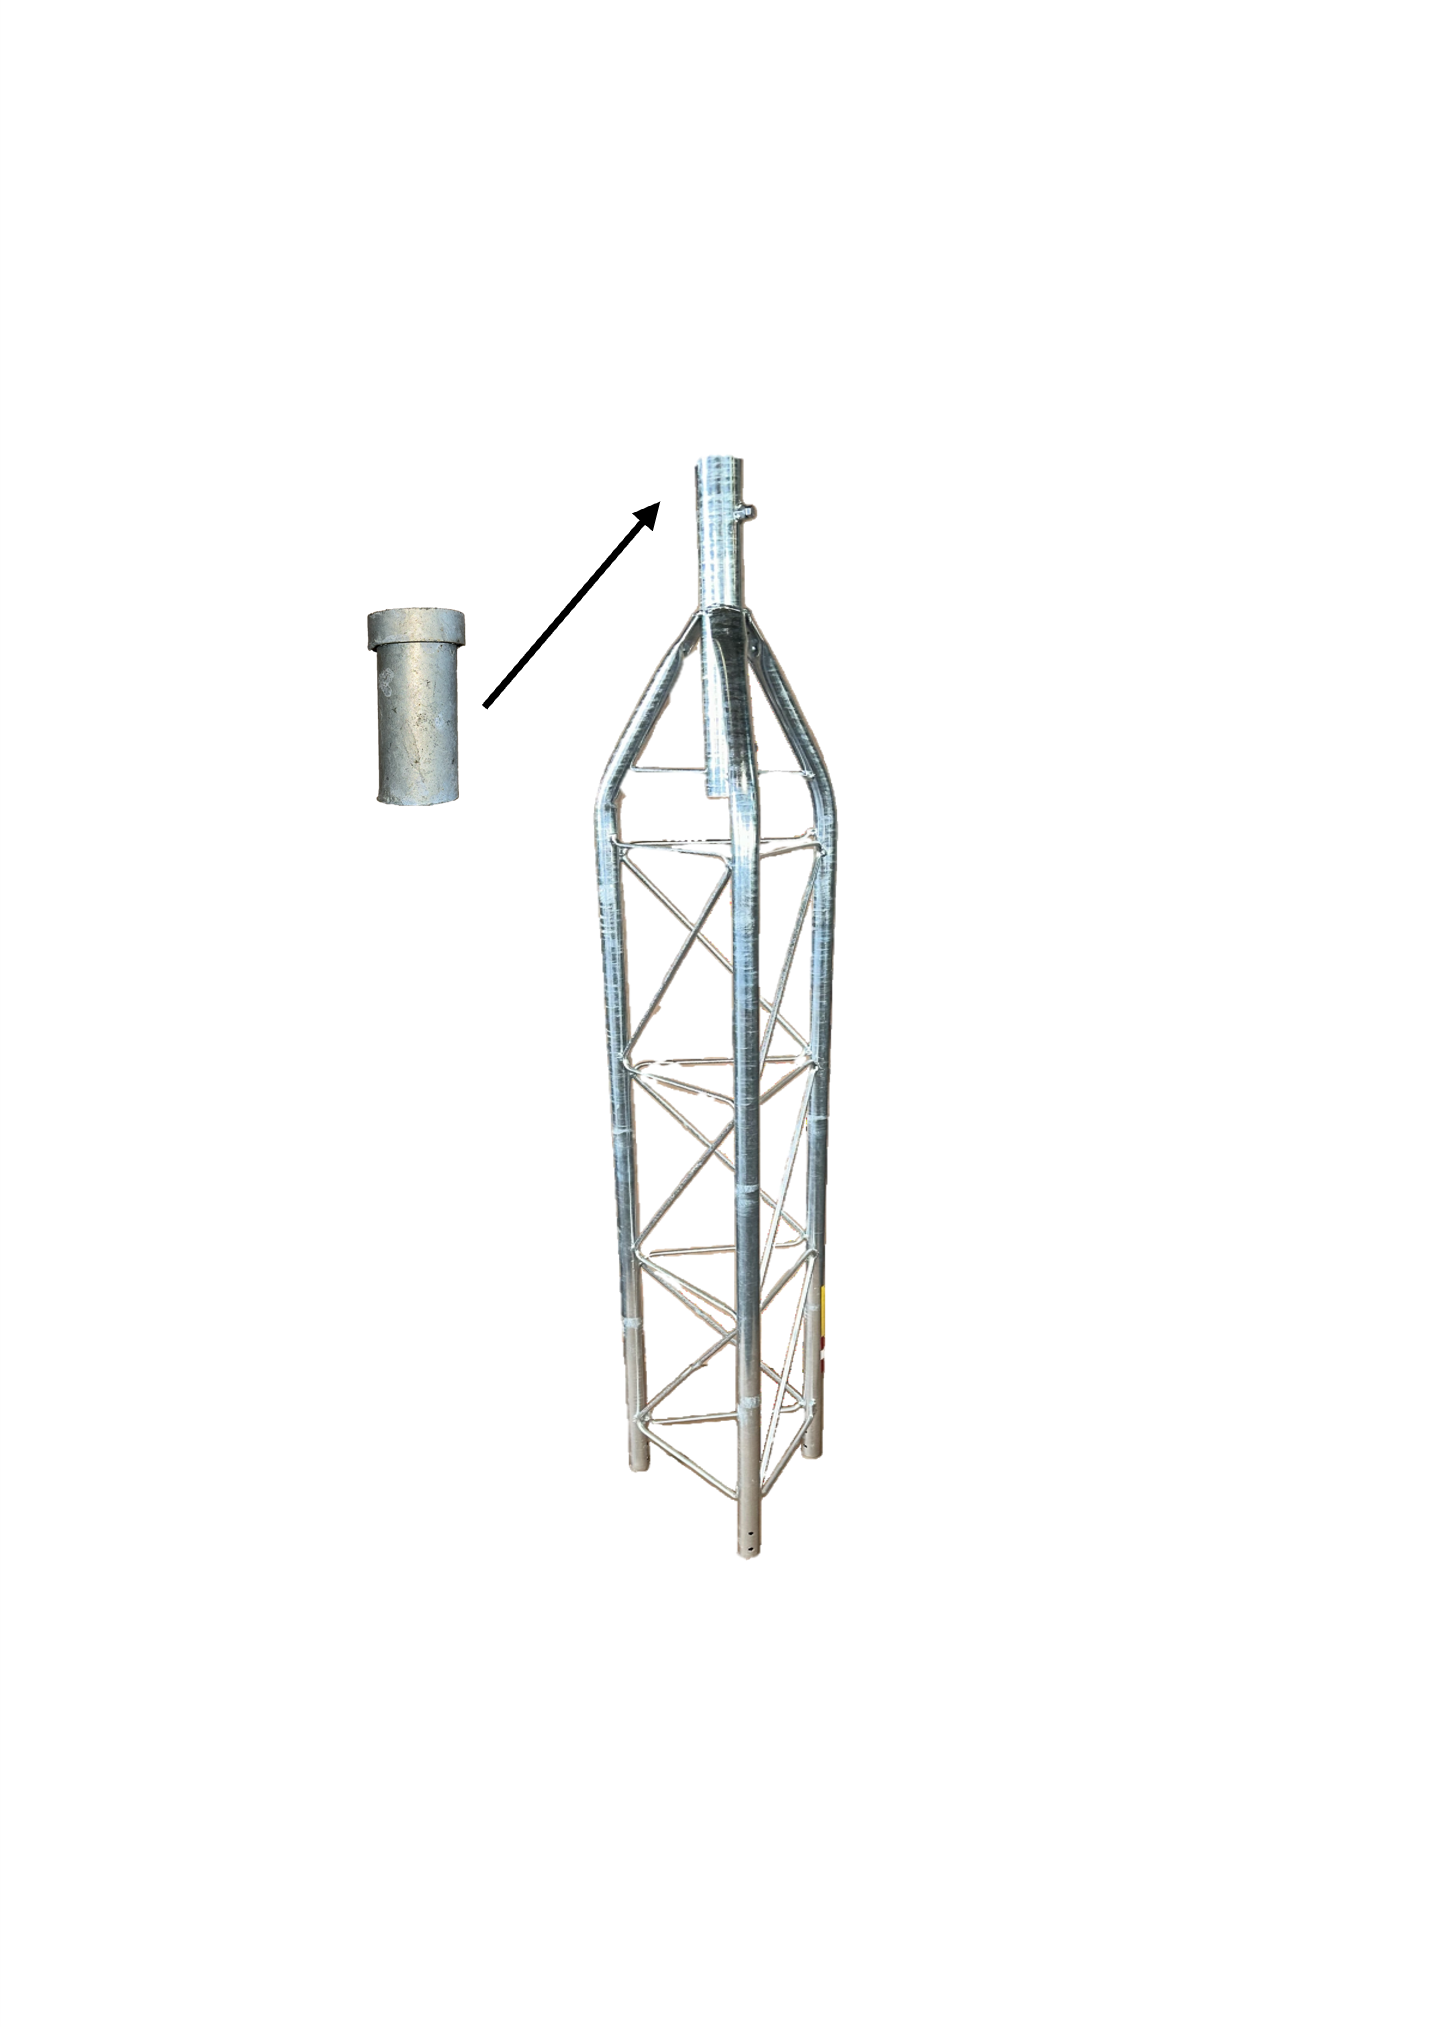 Amerite 25 Series 6 foot Tower Top Section w/ Removable Bushing